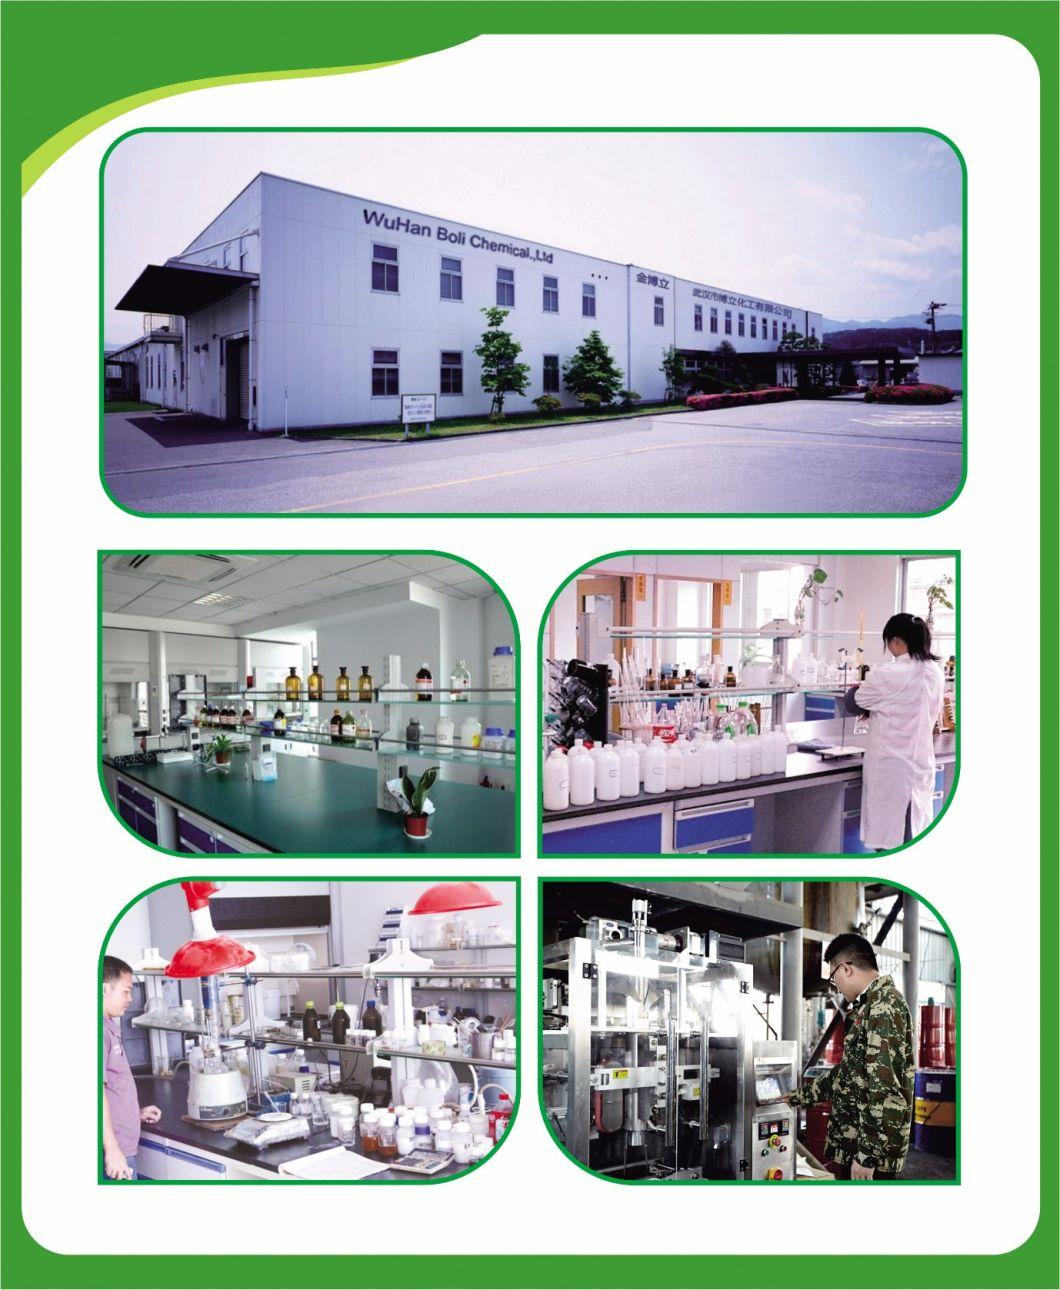 Bag Manufacturing Footwear Making Furniture Industry Favorite Good Low Cost No Harm to Human Body Contact Adhesive Glue